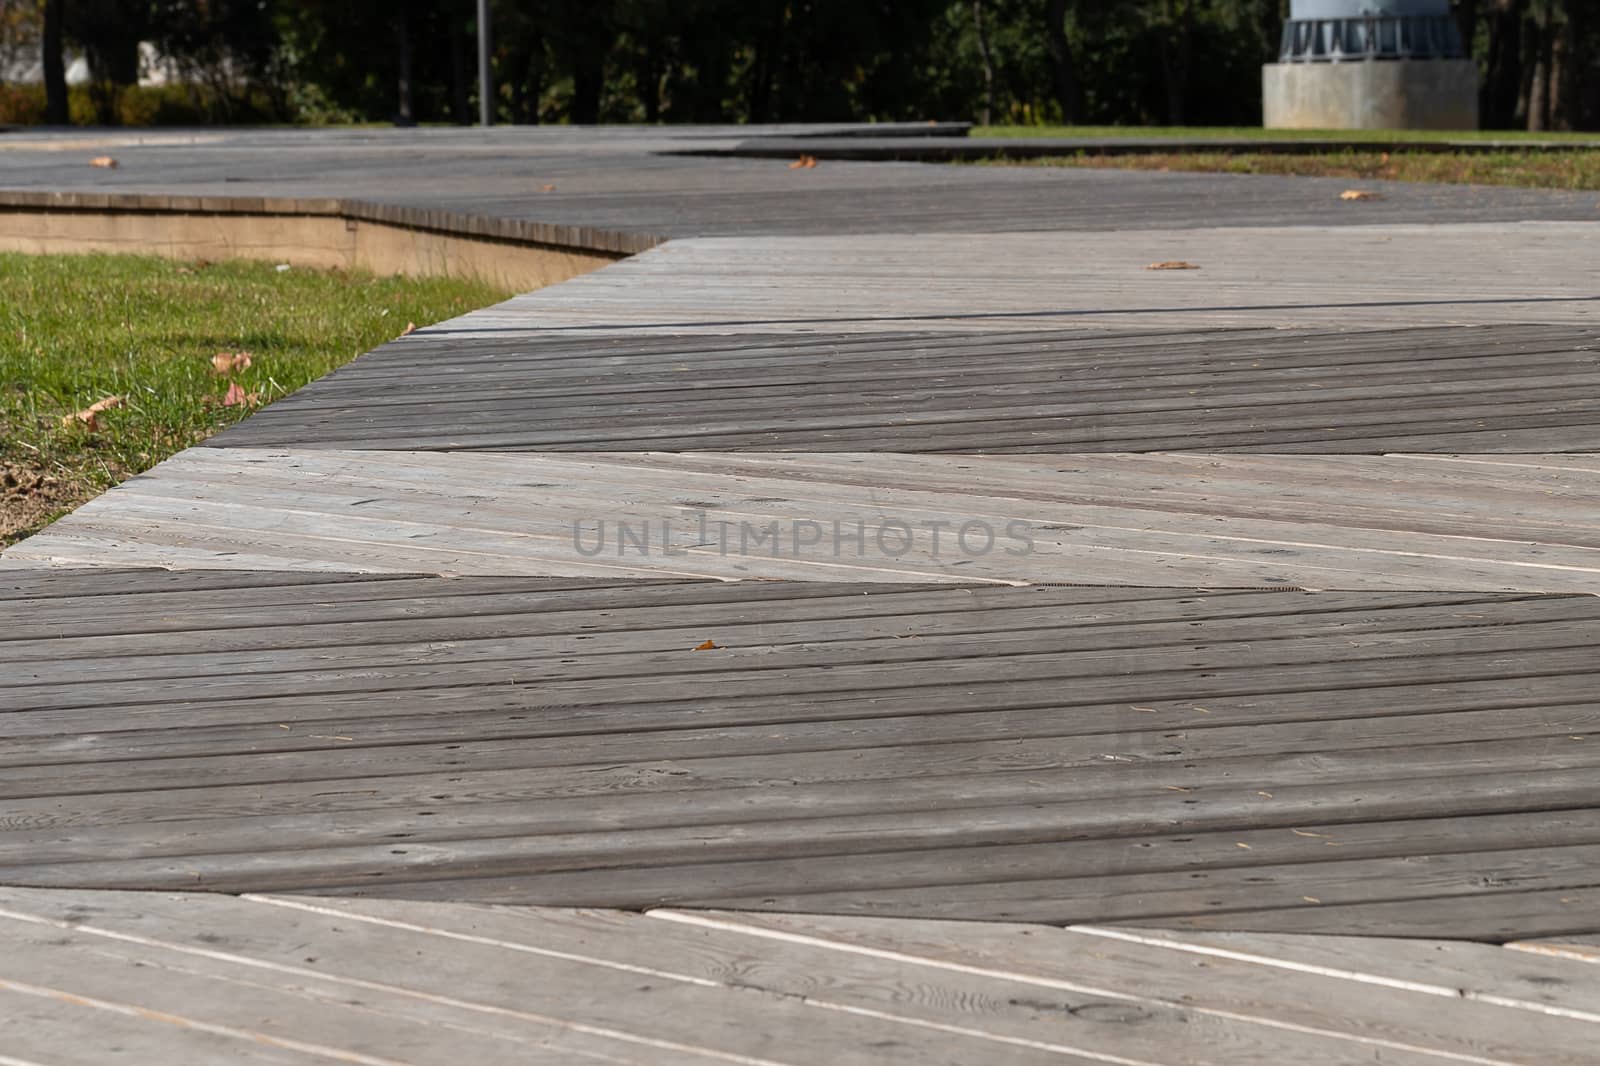 Pedestrian path made with wooden planks on the floor by bonilook